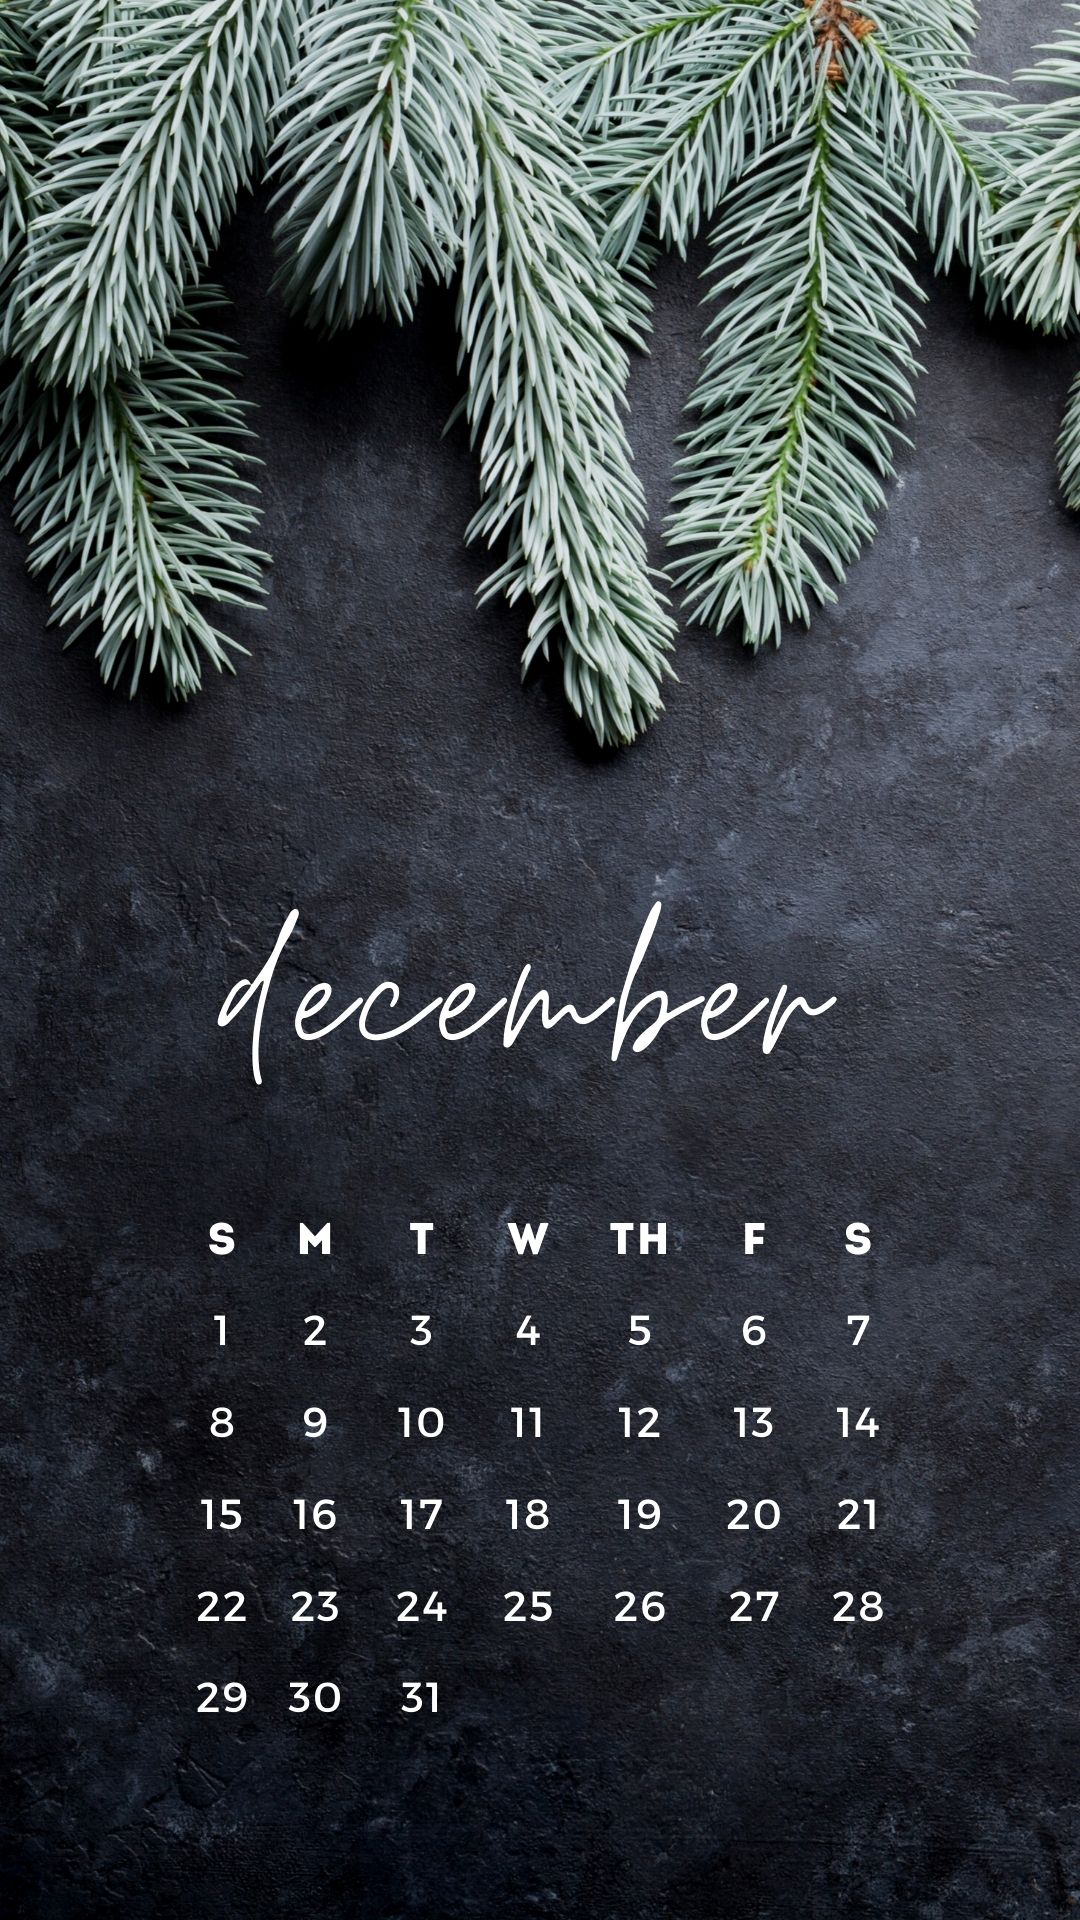 Christmas Wallpaper or winter background for iphone with December Calendar 